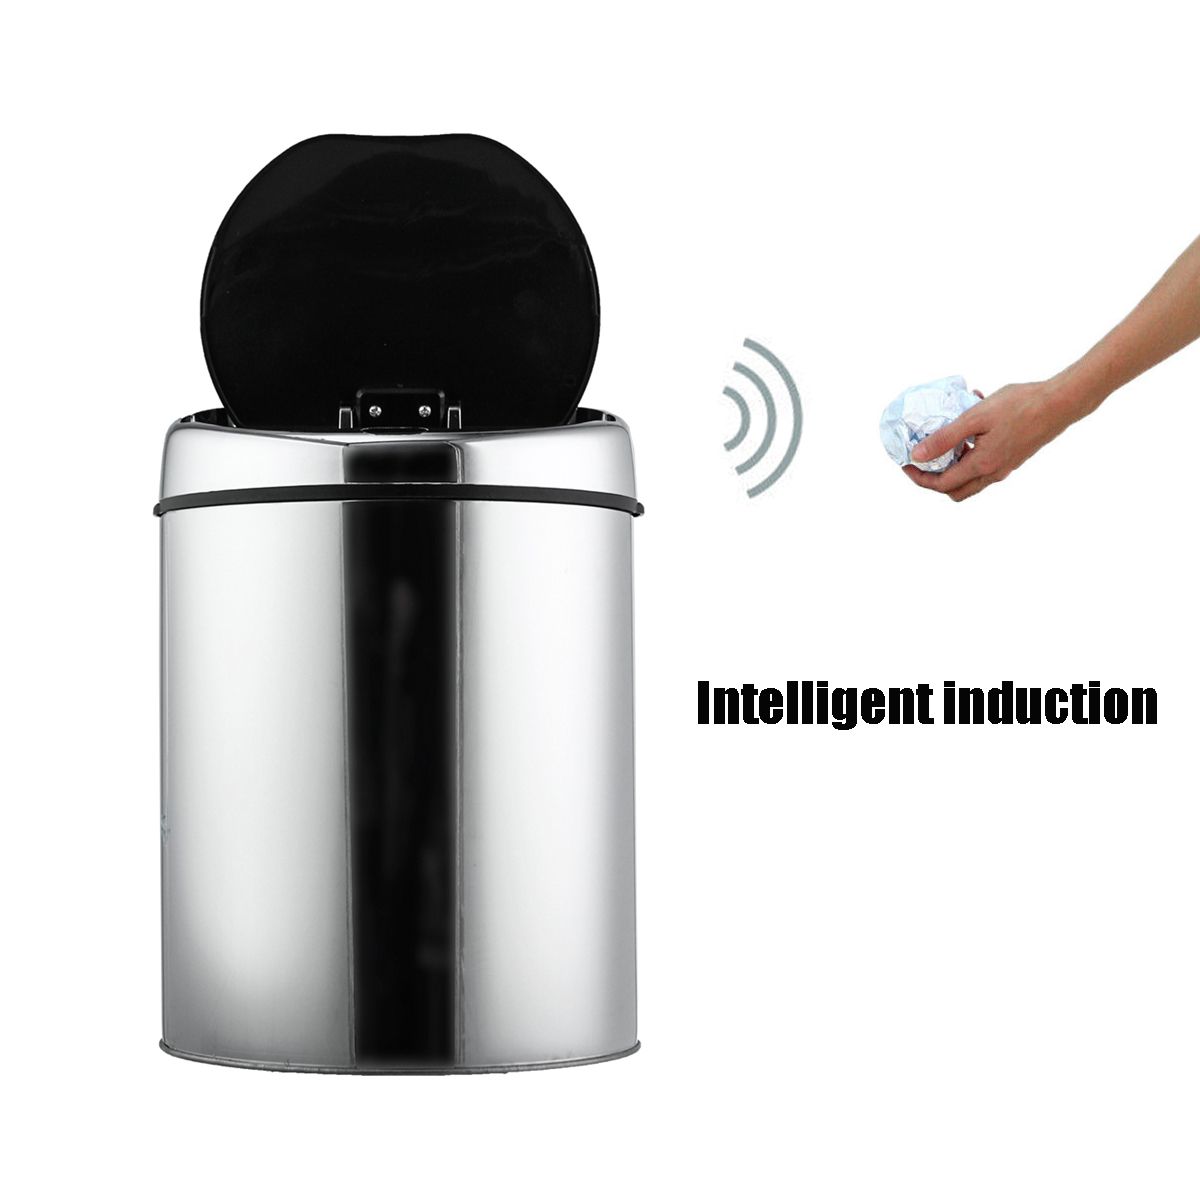 346L-Stainless-Steel-Round-Sensor-Trash-Can-Touchless-Motion-Automatic-Opening-Recycler-Waste-Bins-1320332